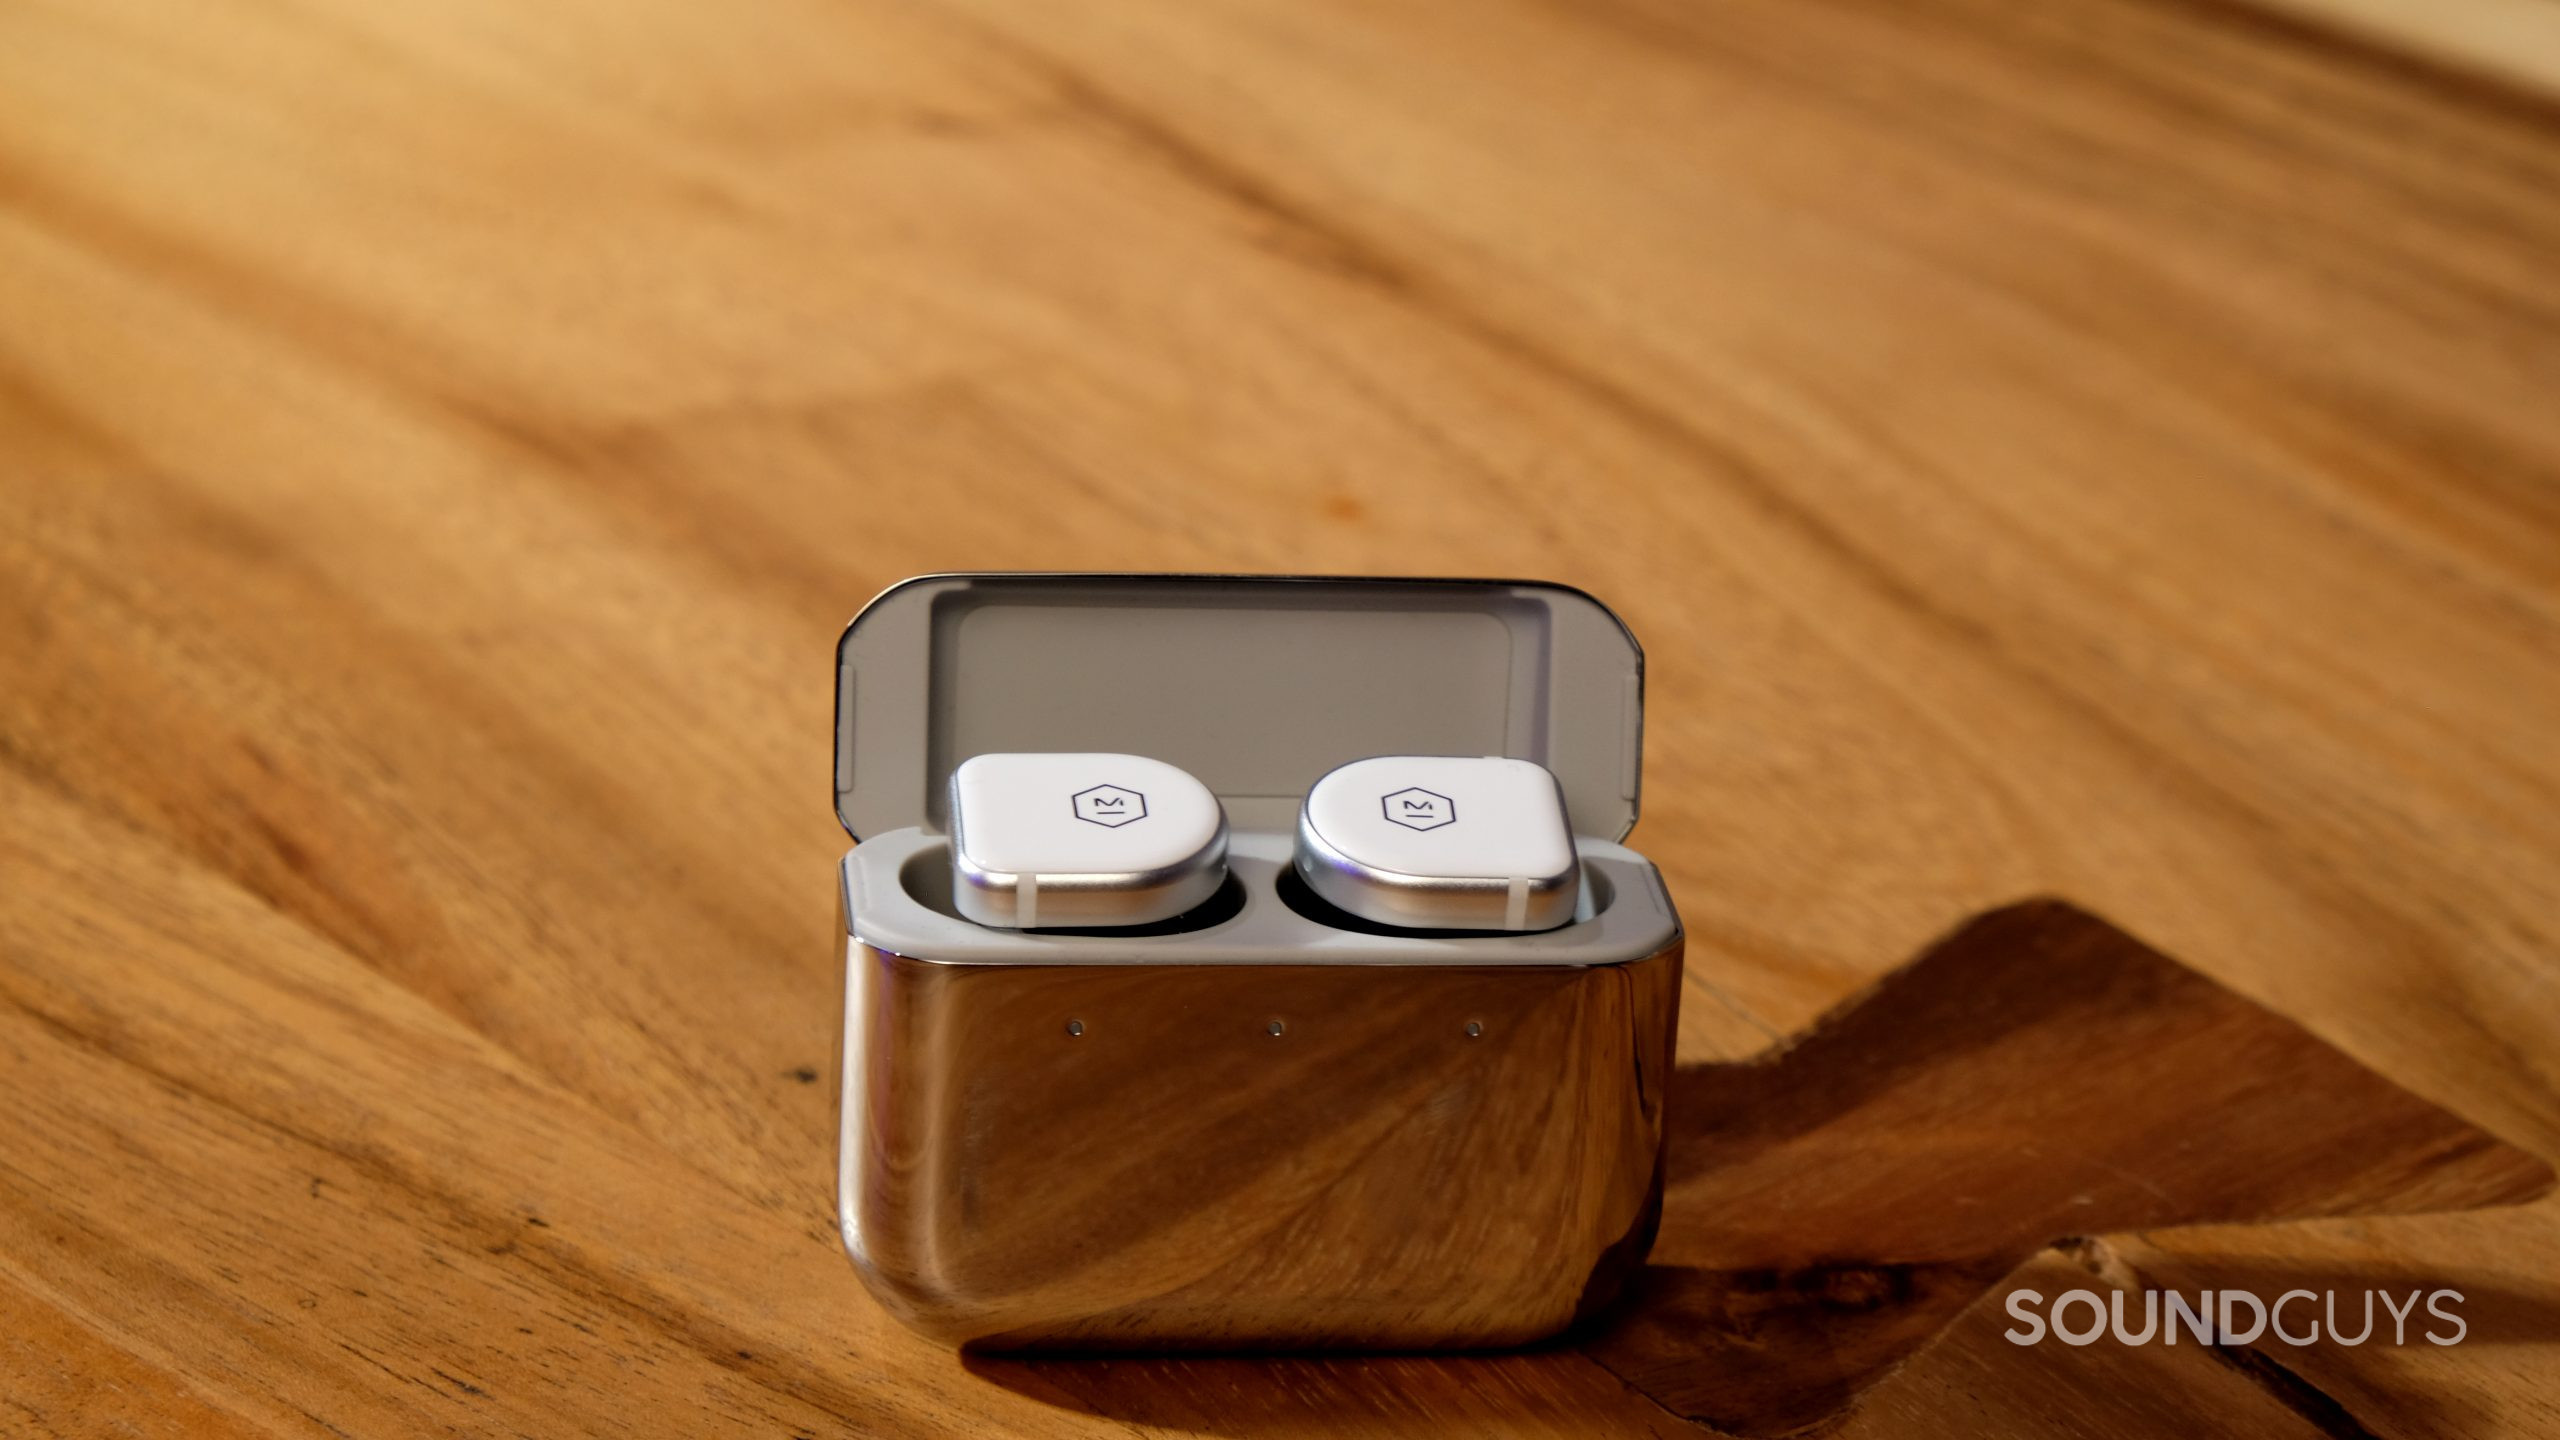 The Master &amp; Dynamic MW08 true wireless noise canceling earbuds rest in the mirrored charging case.